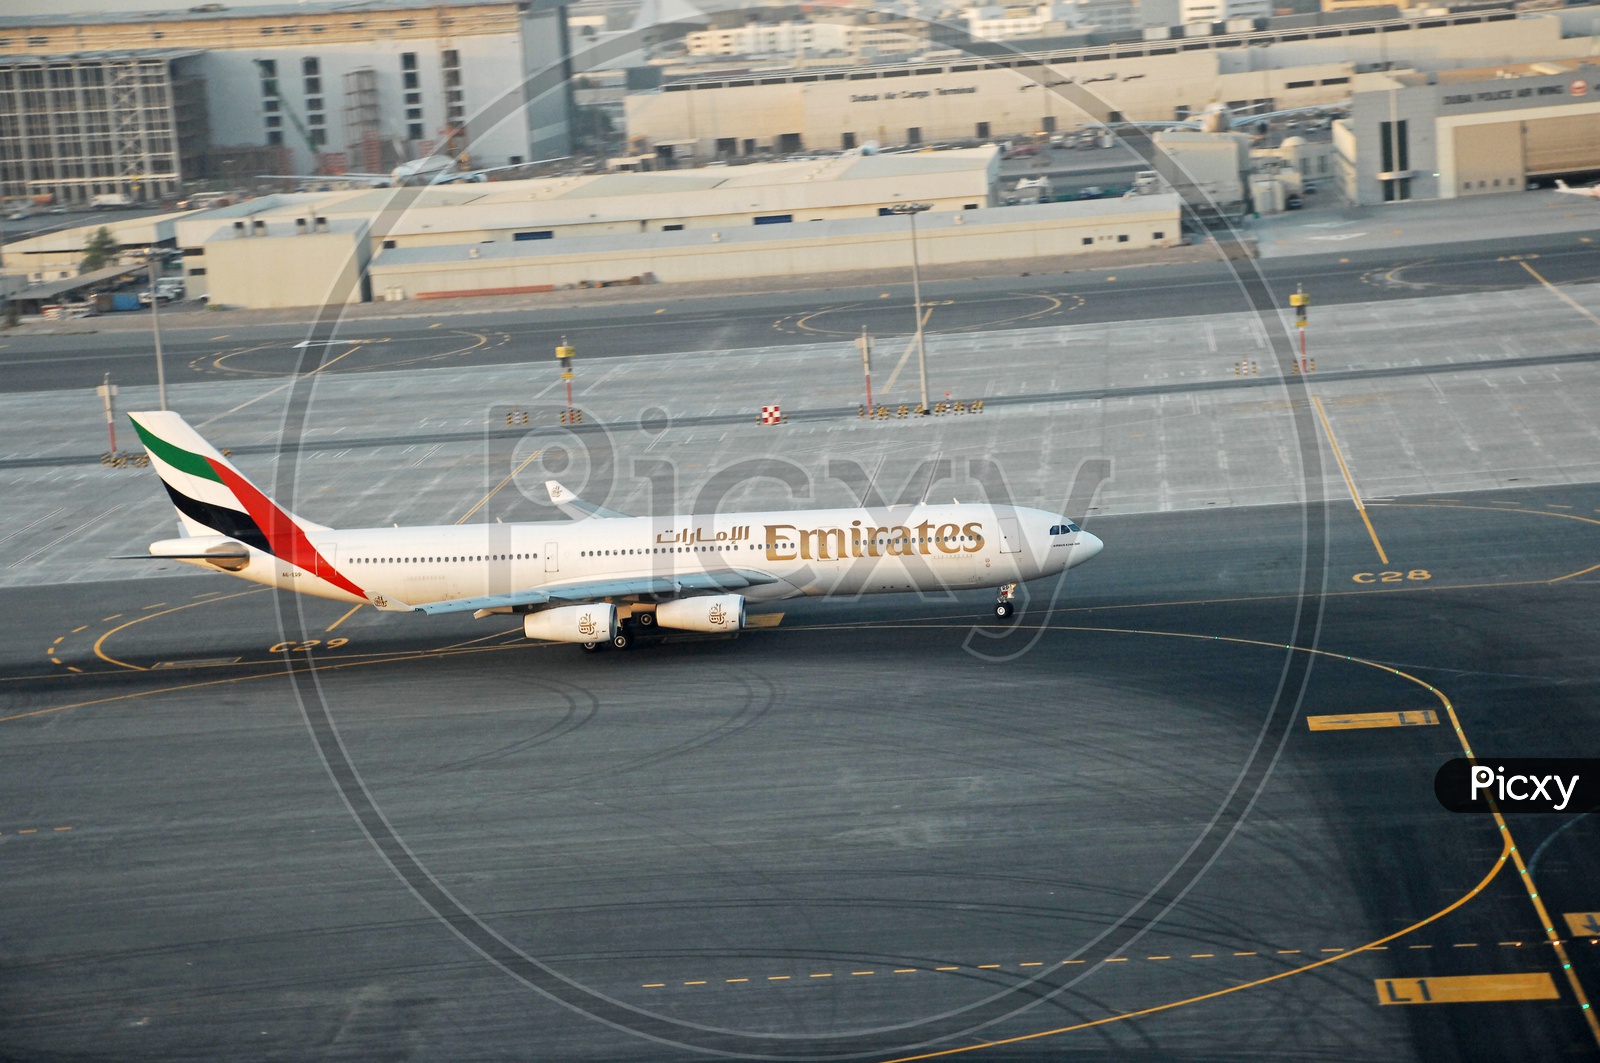 Emirates flight about to take off